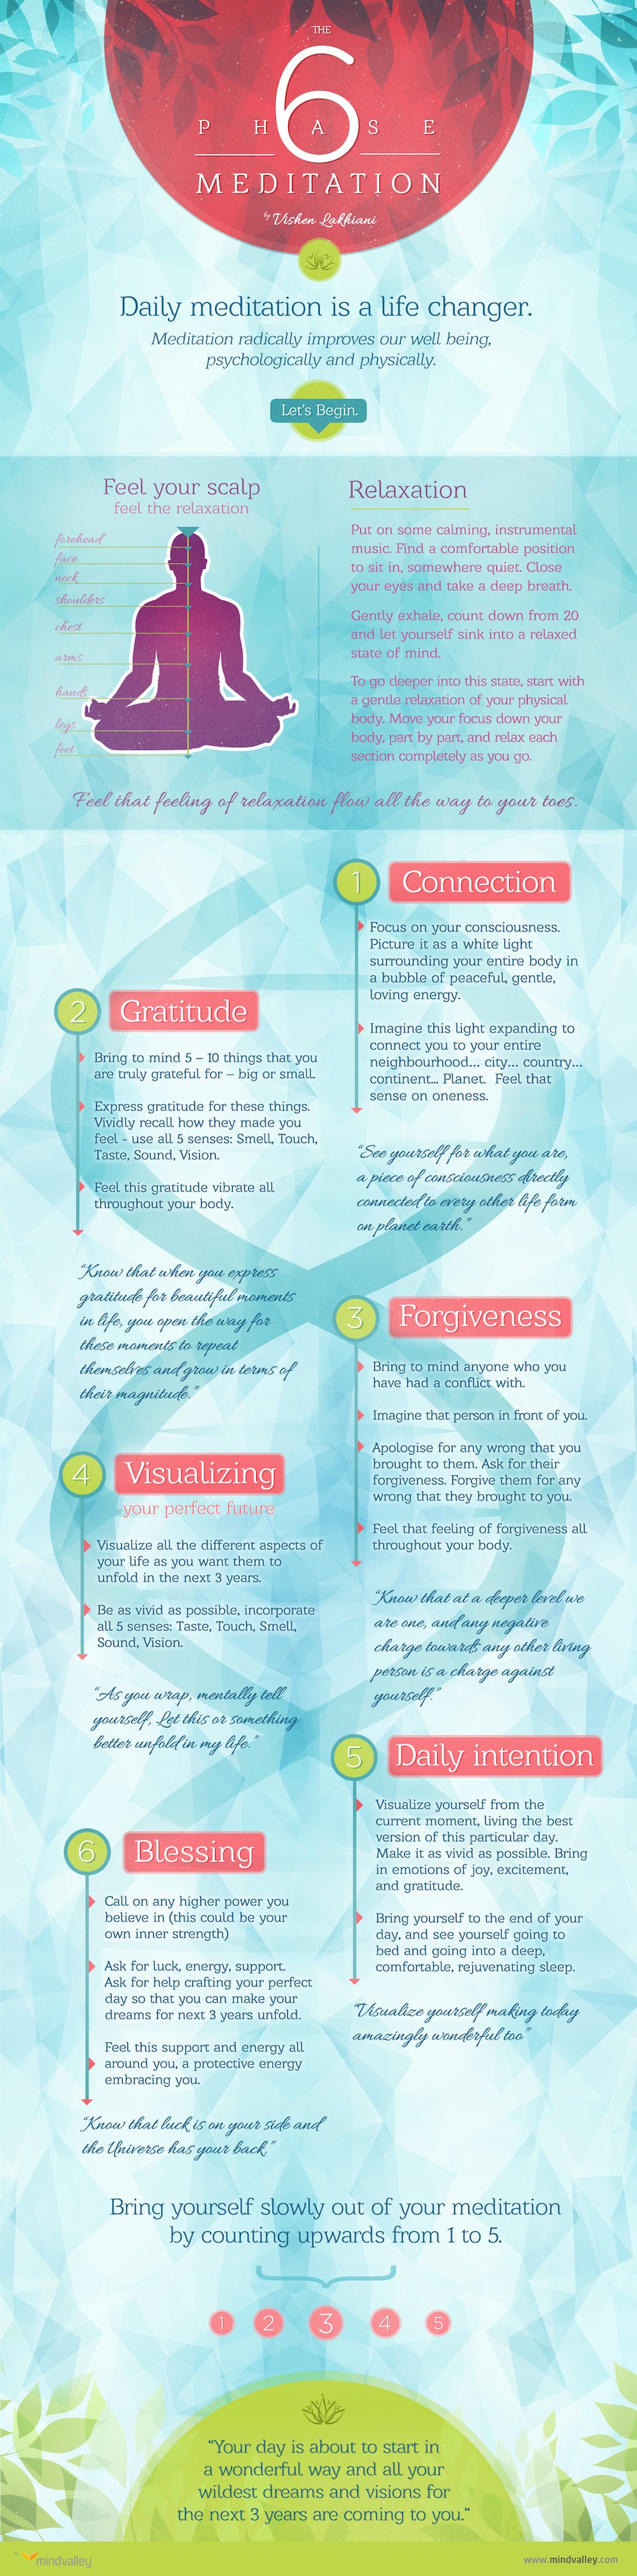 Infographic for The 6 Phase Meditation Method